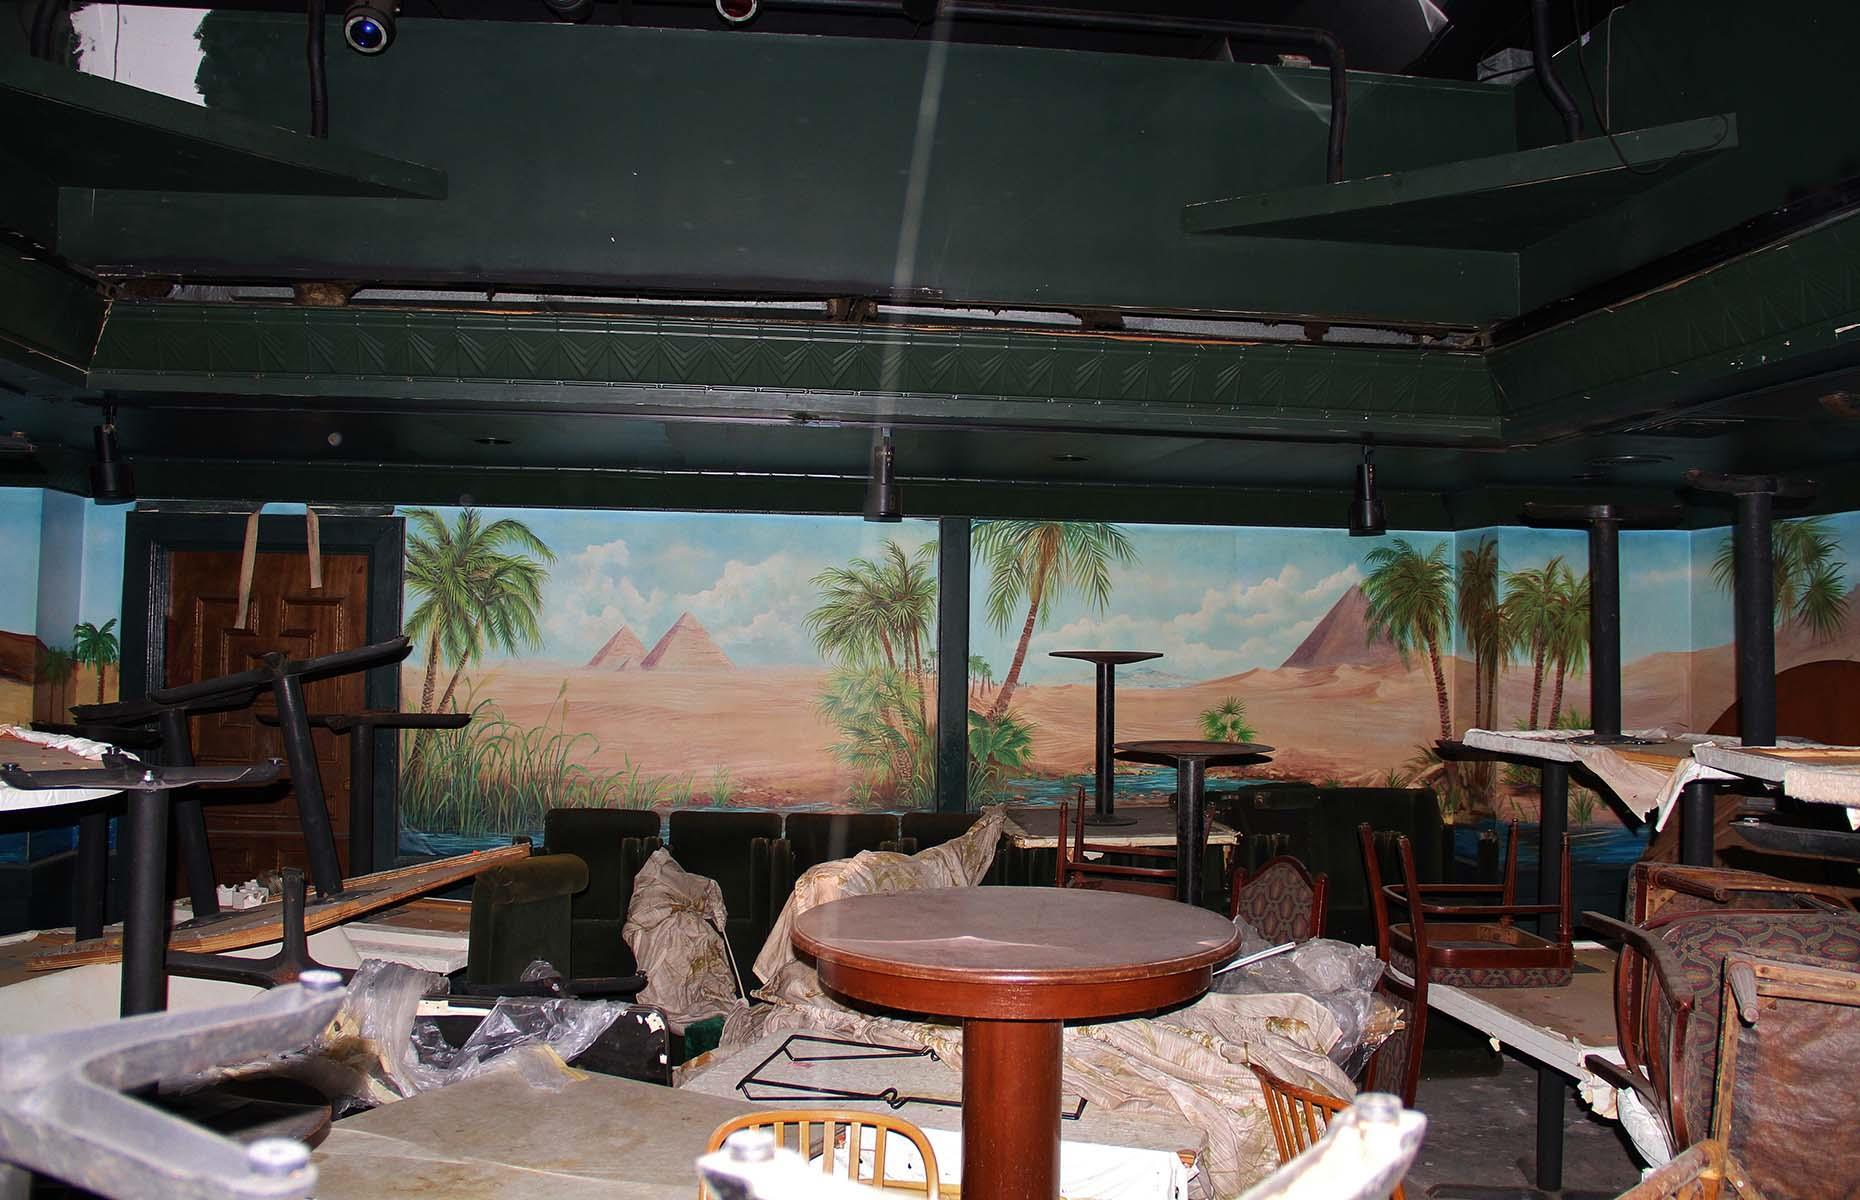 An Egyptian-themed restaurant which fell victim to vandalism, USA